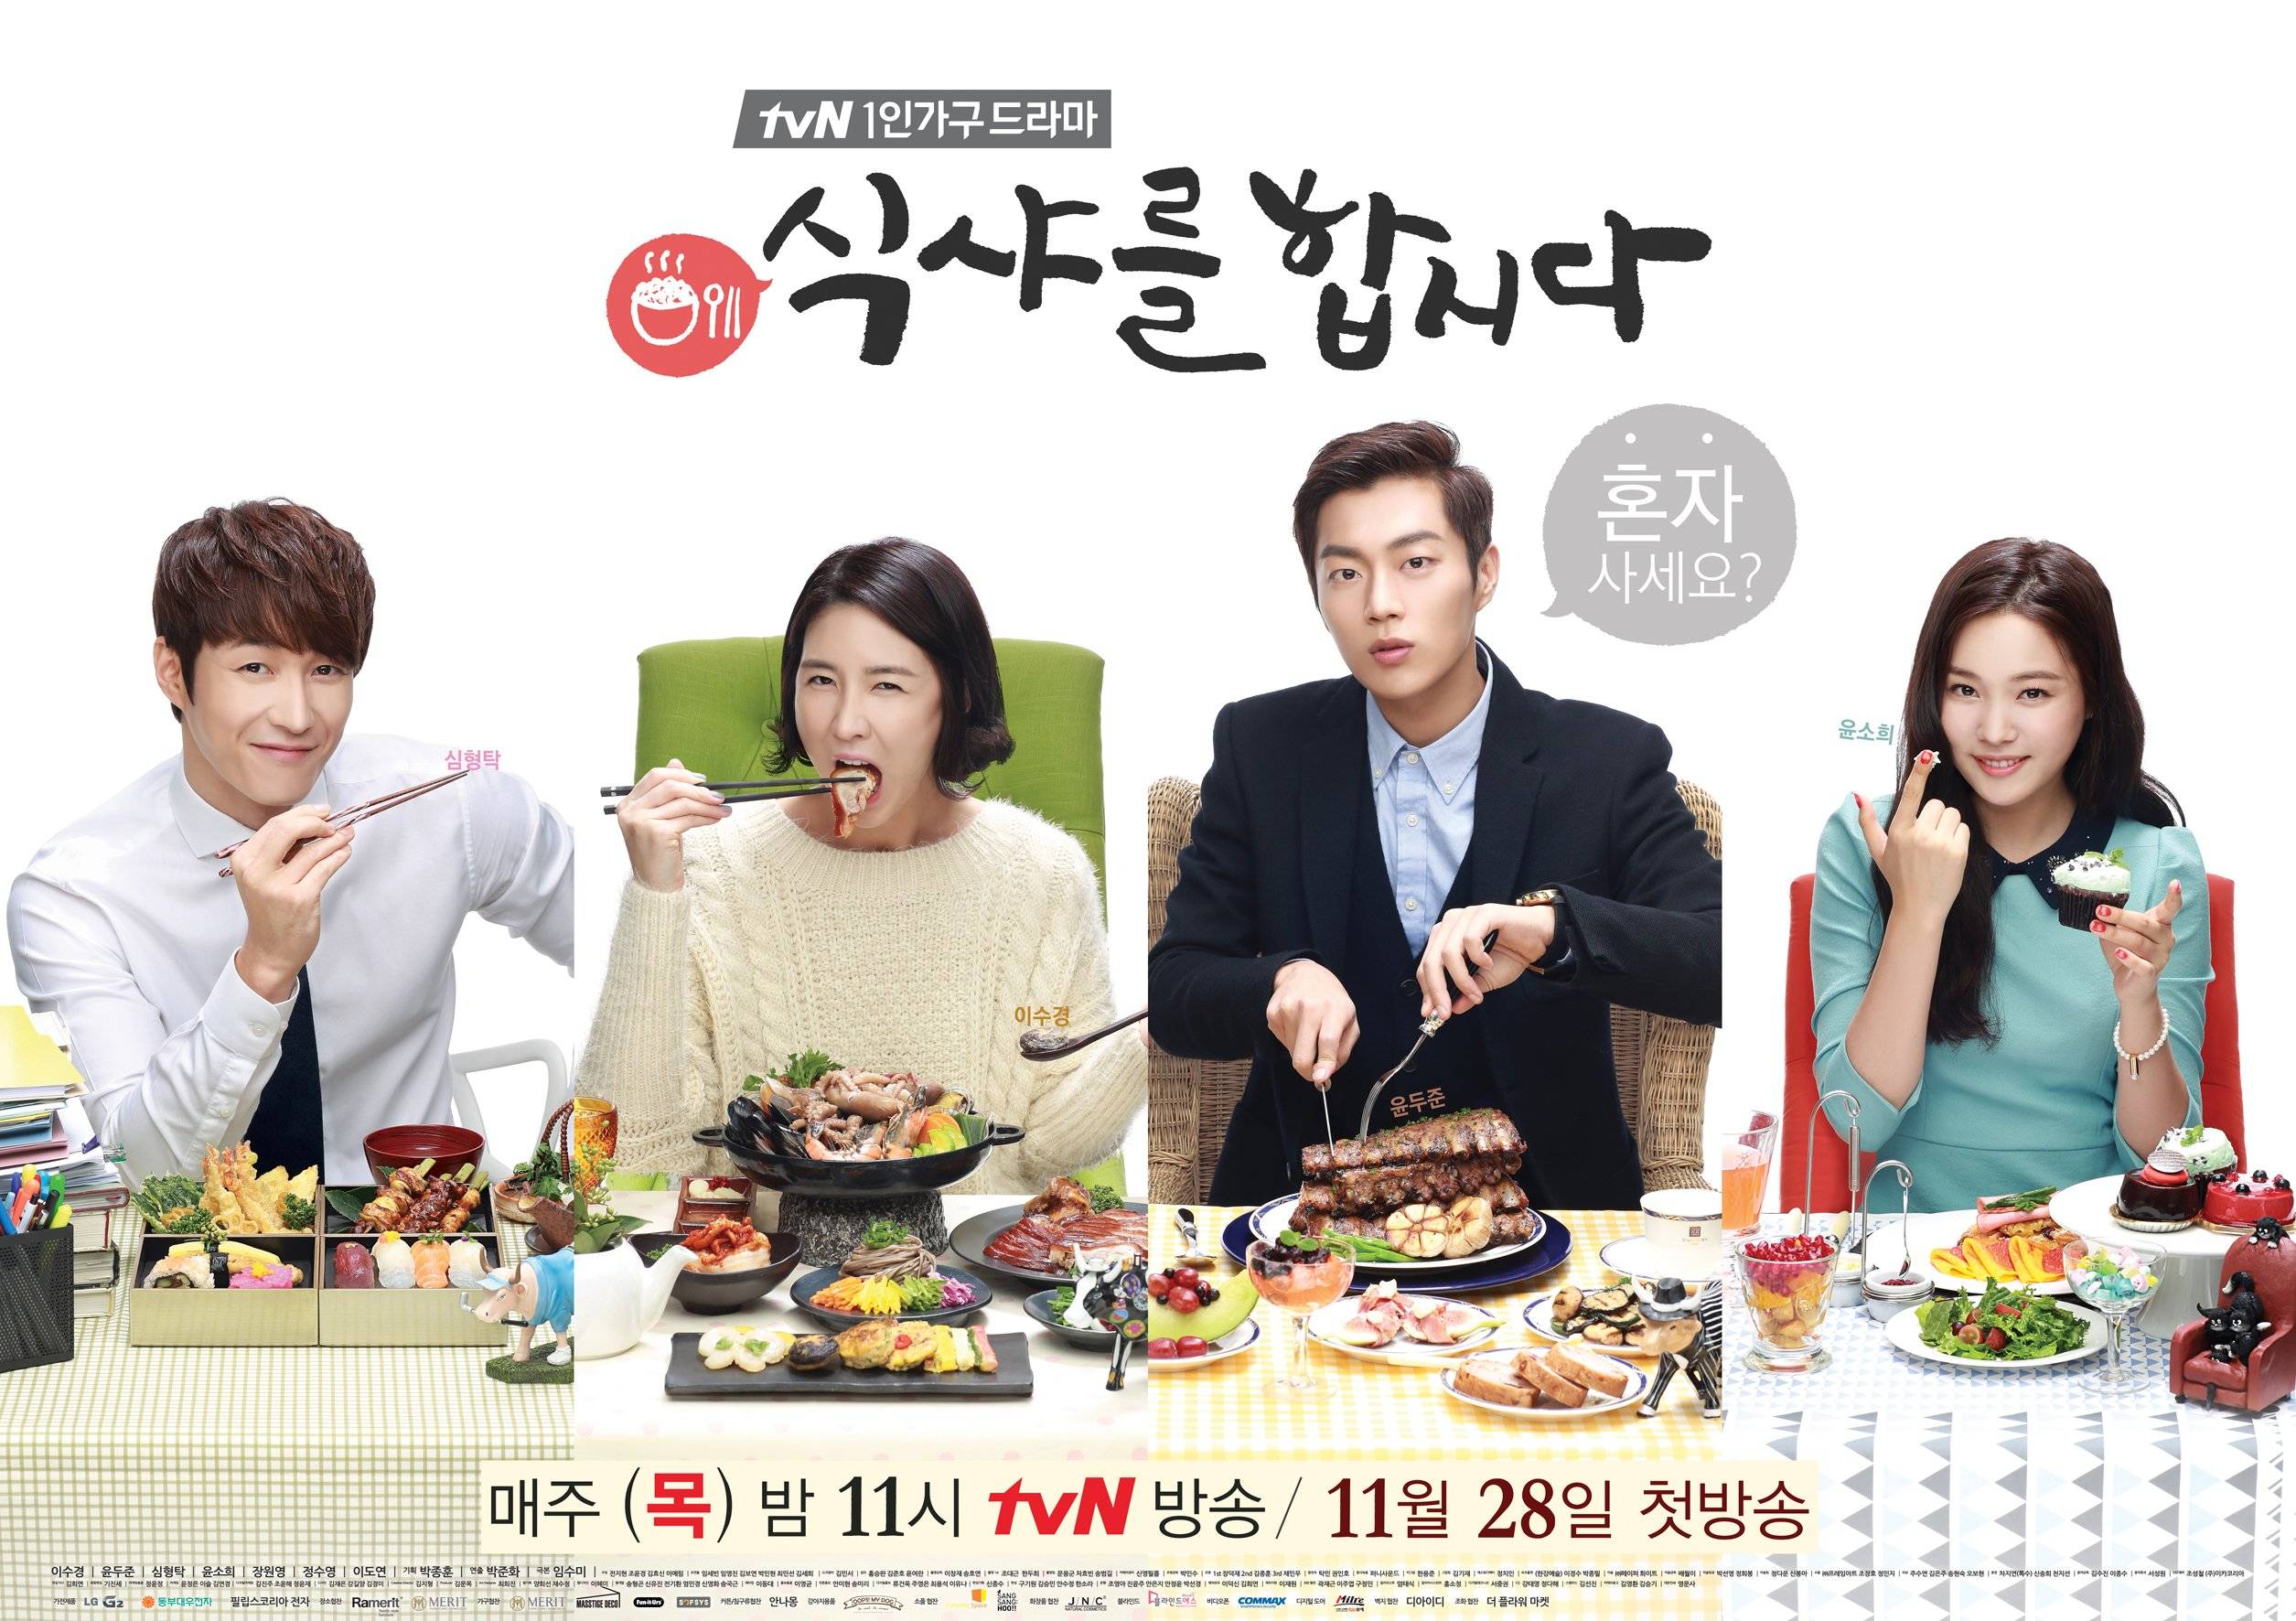 Added posters and new images for the upcoming Korean drama "Let's Eat